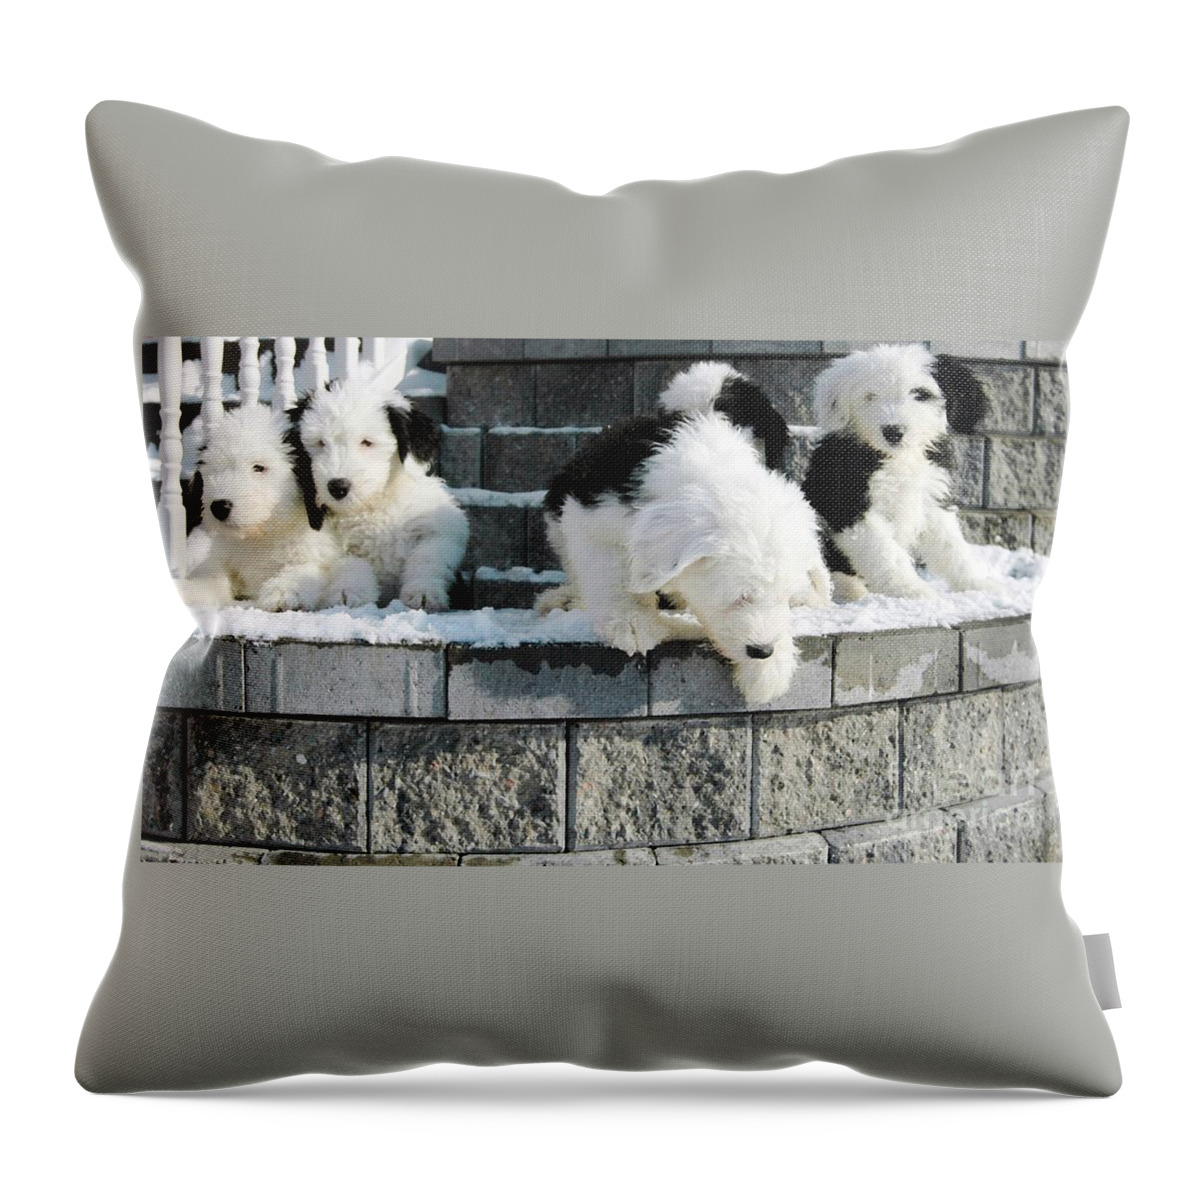 #pixelslovesdogs Old Throw Pillow featuring the photograph I Want To Jump by Kathleen Struckle